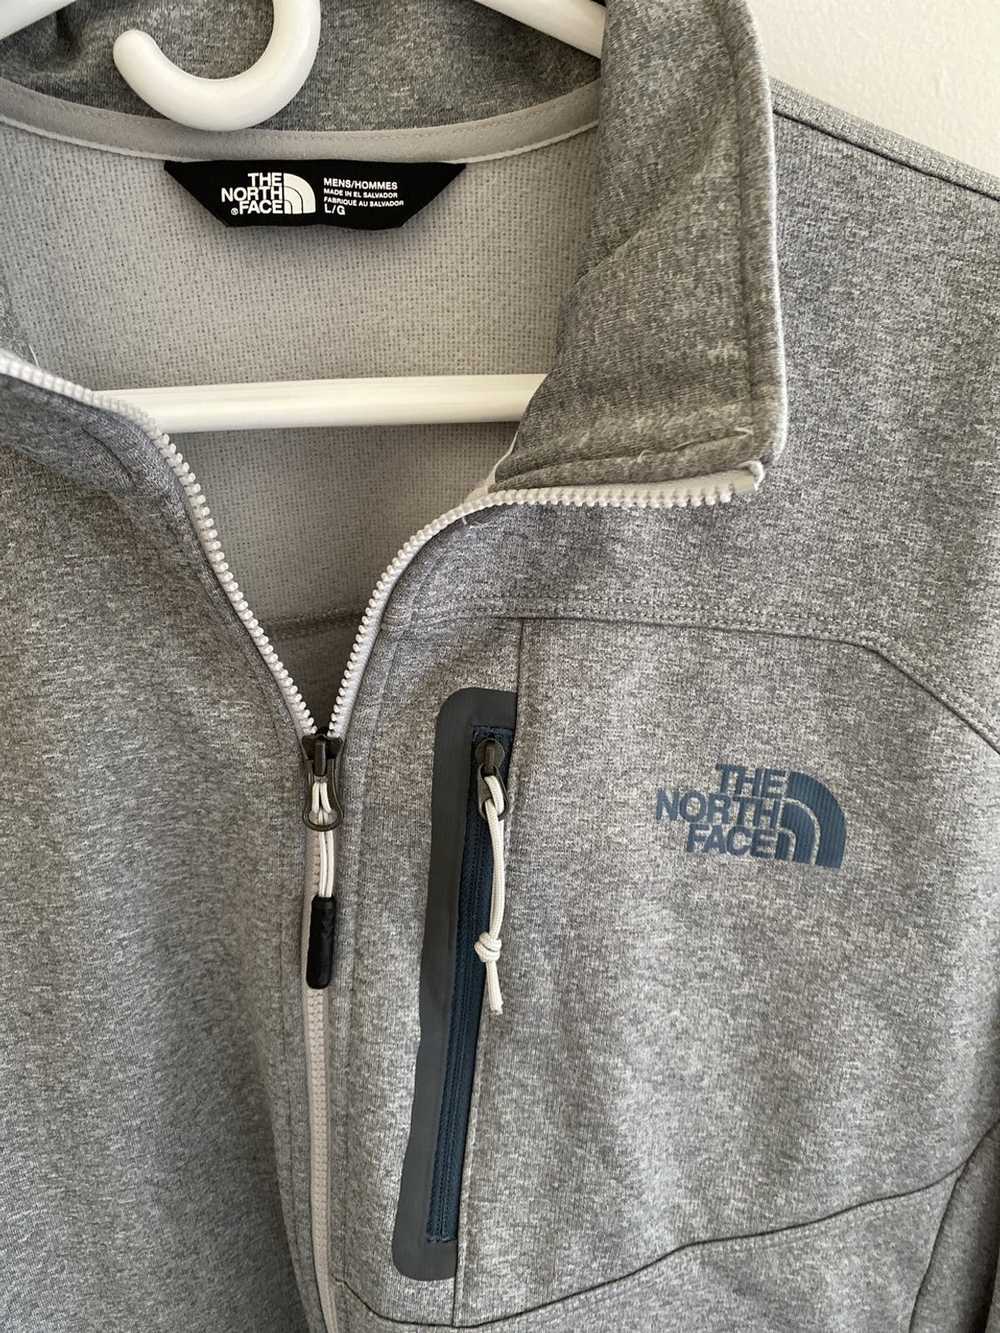 The North Face North face zip up - image 3